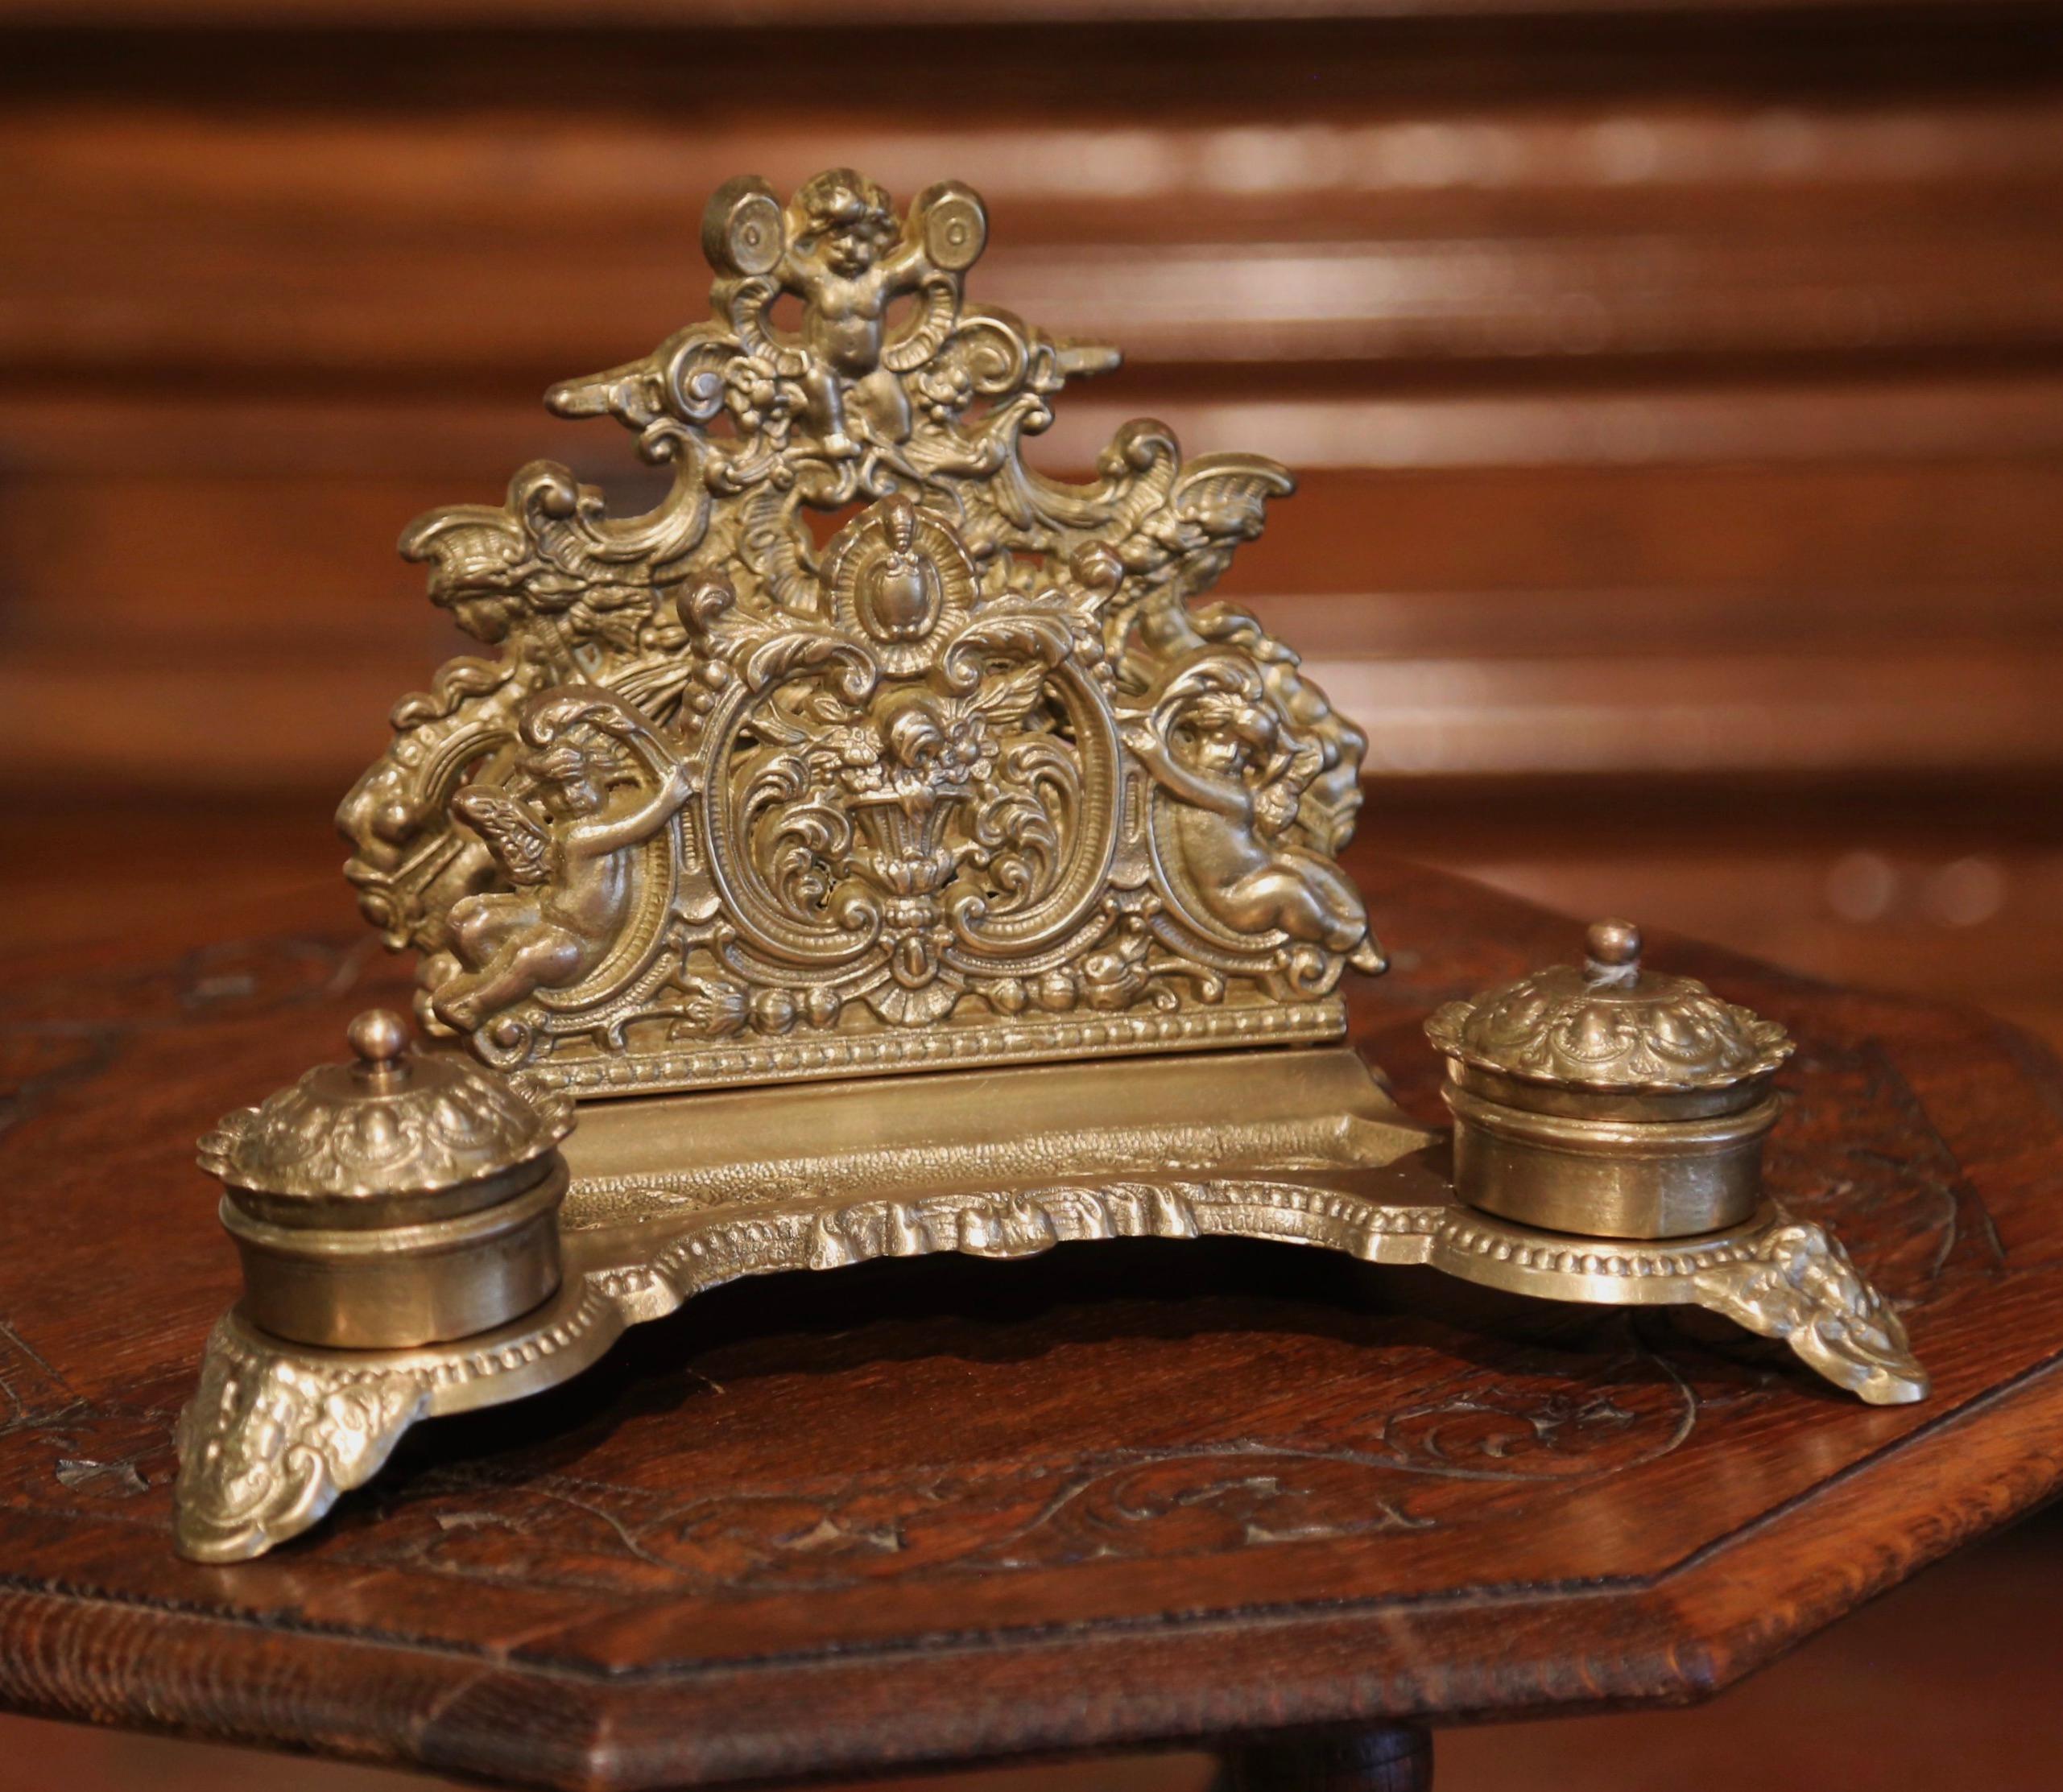 Repoussé 19th Century Belgium Louis XV Rococo Repousse Brass Inkwell with Letter Holder For Sale